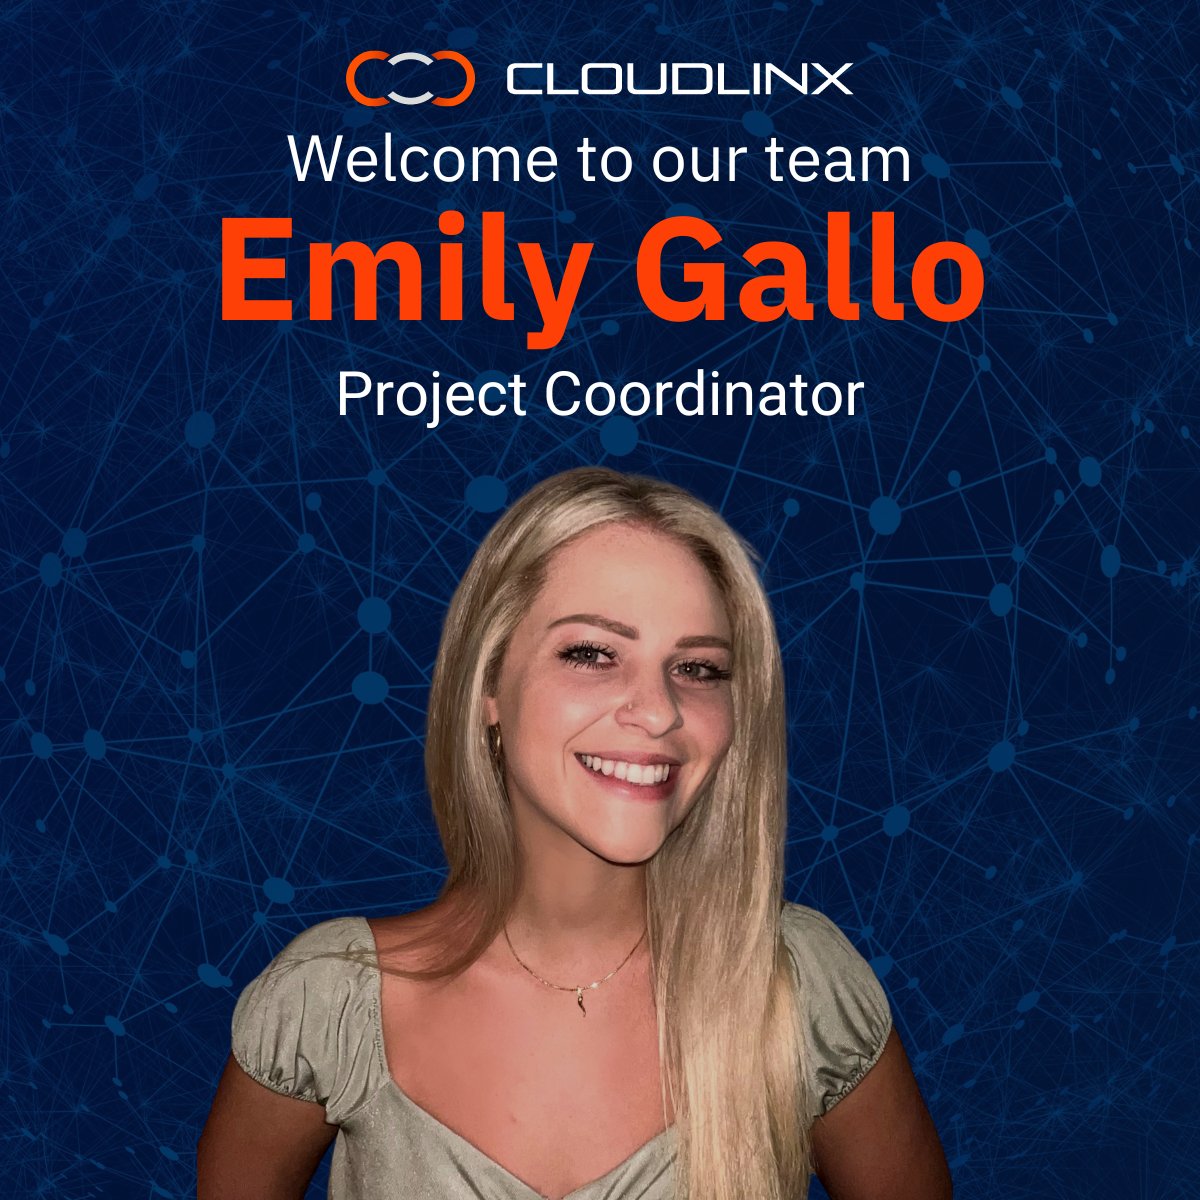 Cloudlinx is proud to welcome Emily Gallo as Project Coordinator to our growing organization. She will be working directly with our Director of Operations, Brianna Rickert, and her carrier services delivery group. #digitaltransformation #contactcenter #CCaaS